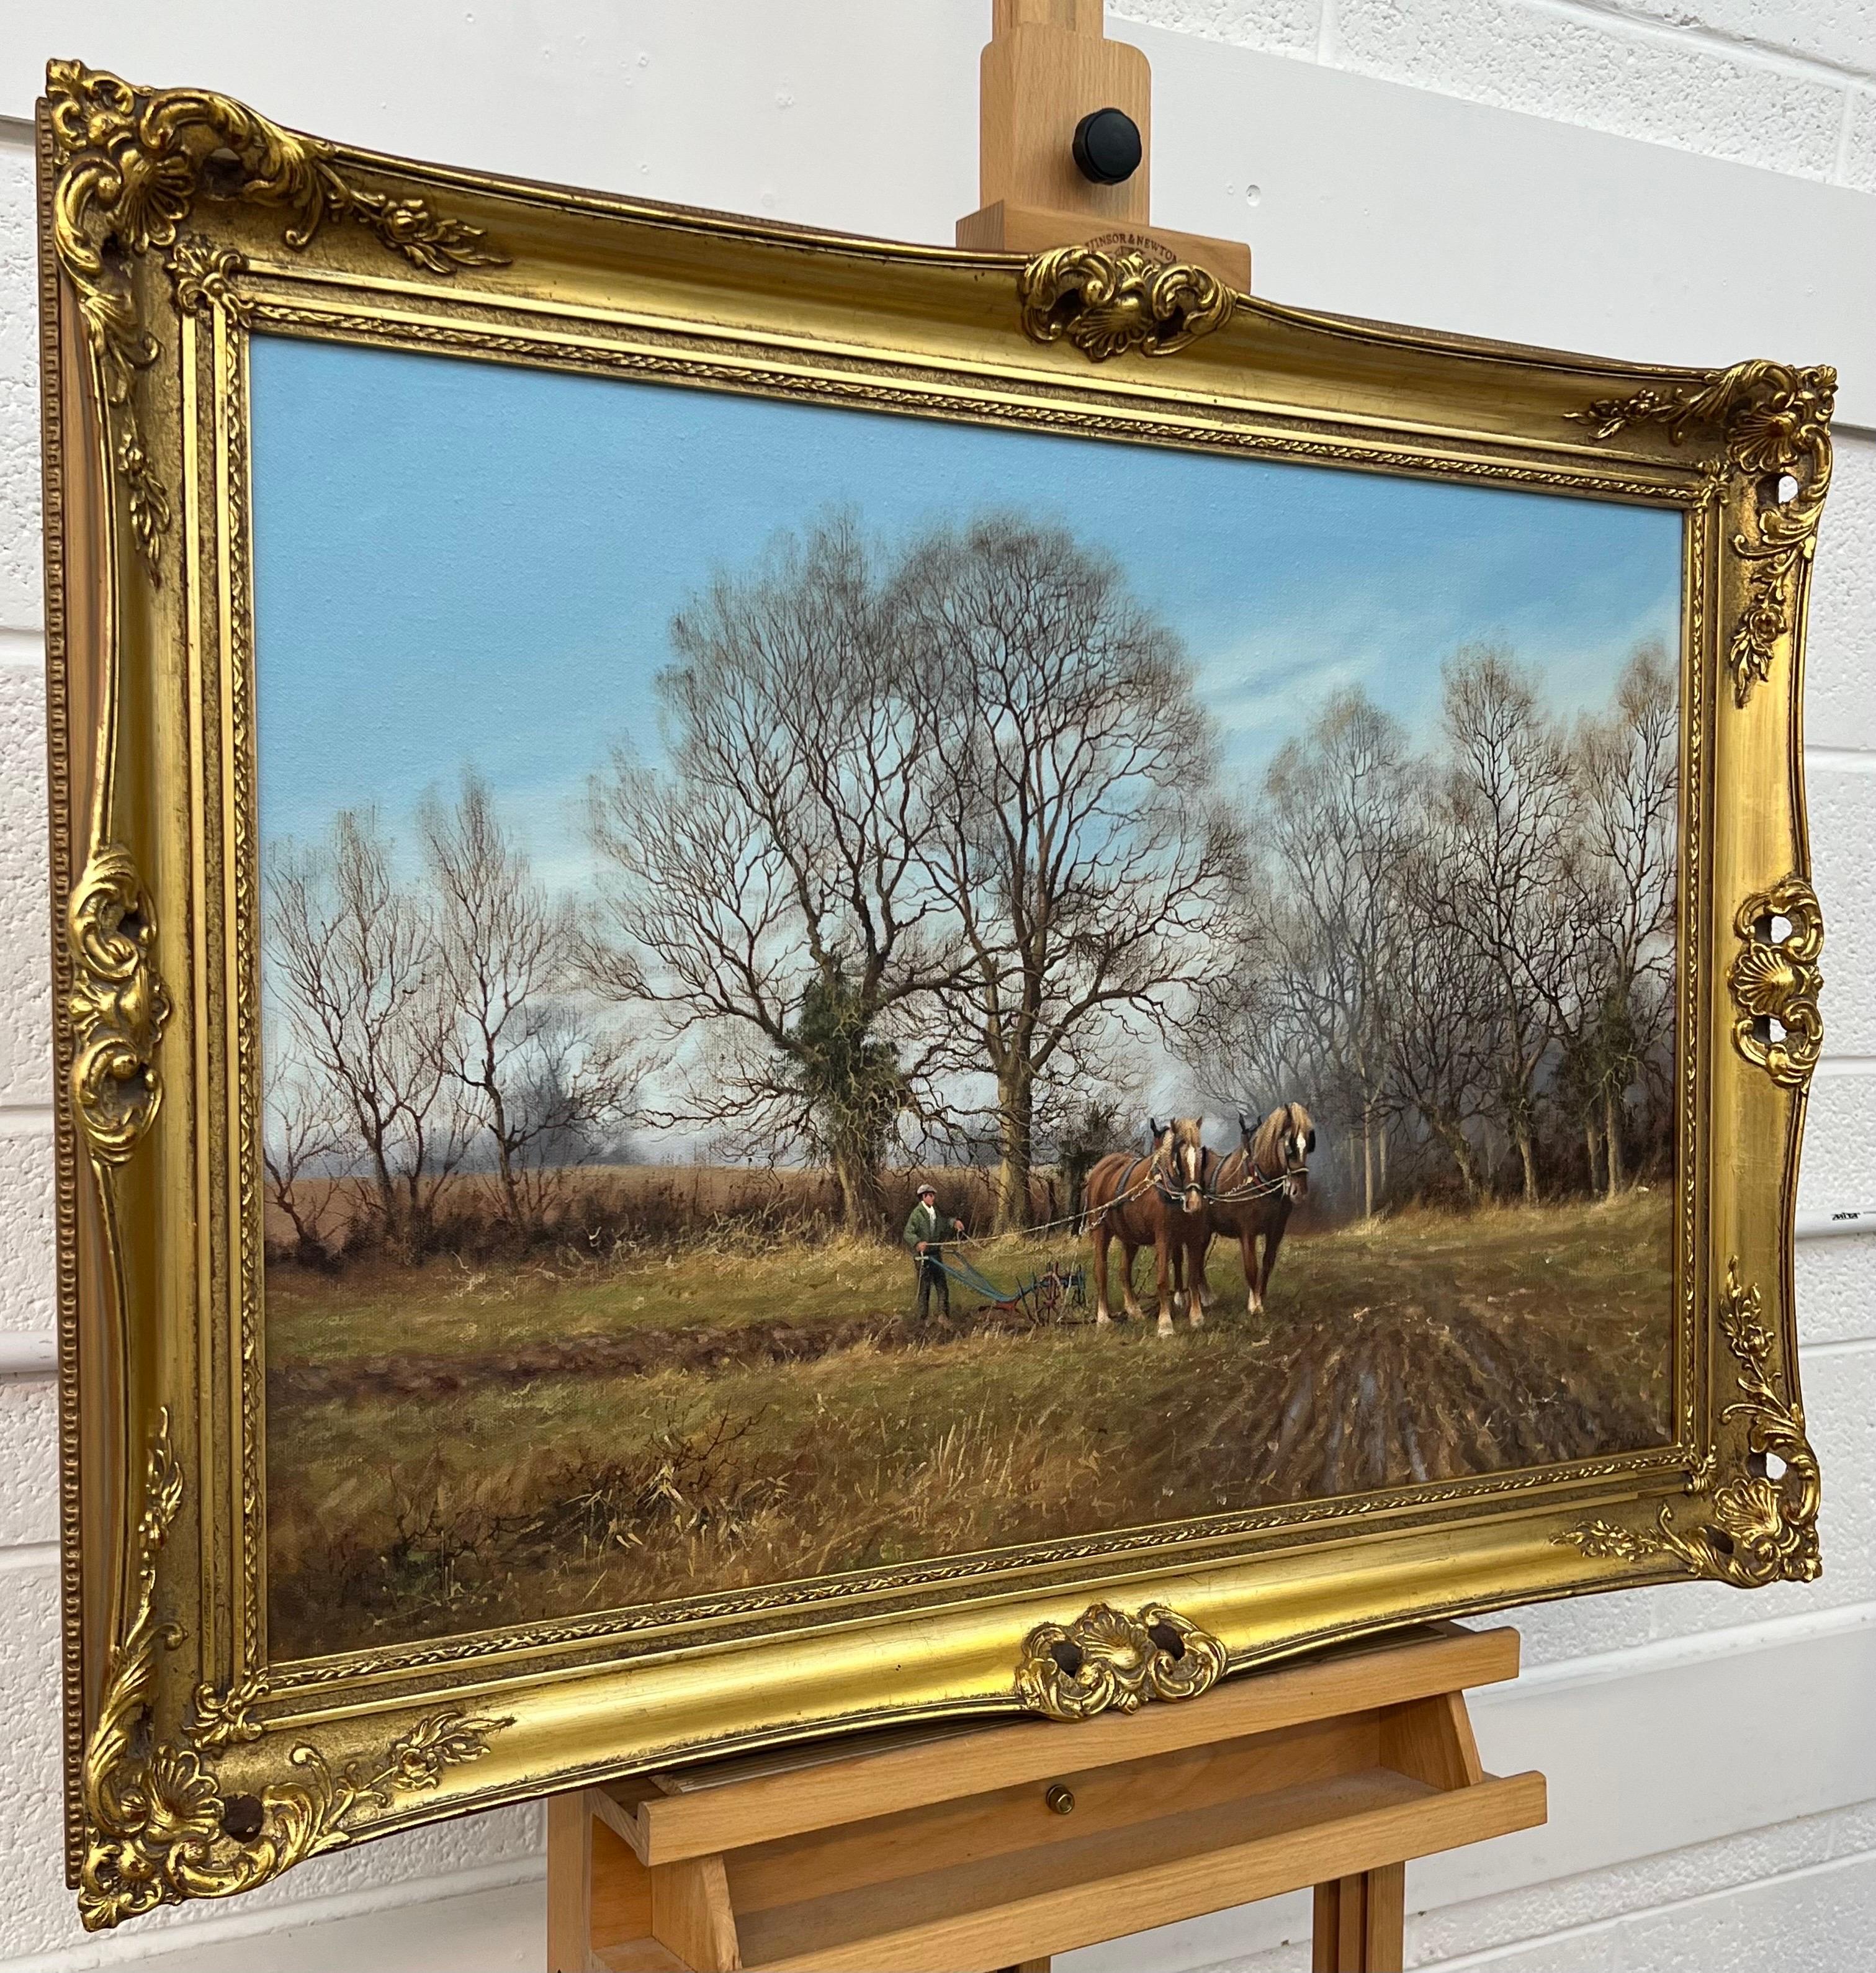 English Countryside & Trees with Horses Pulling Plough by Vintage British Artist - Realist Painting by James Wright